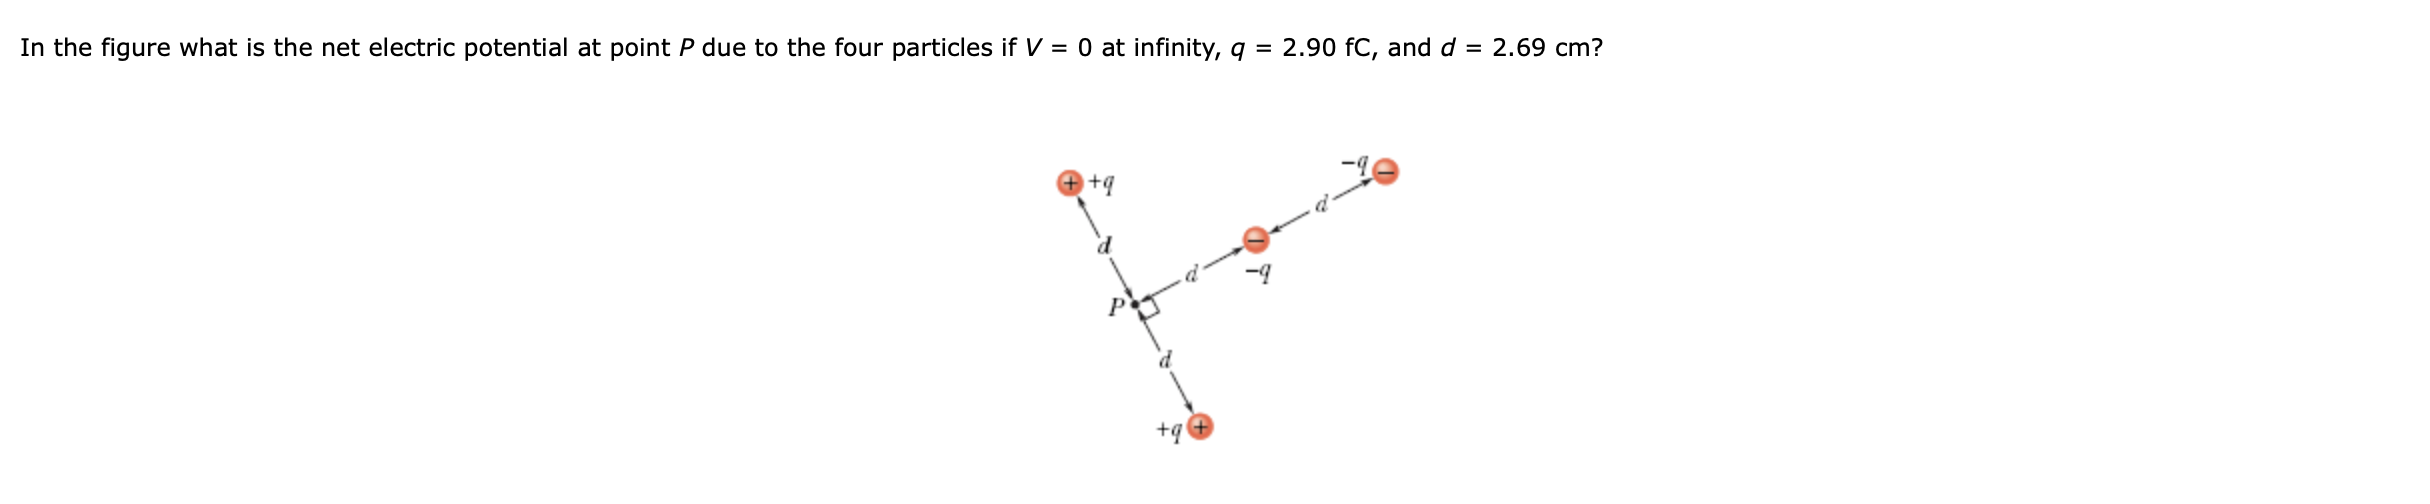 In the figure what is the net electric potential at point P due to the four particles if V = 0 at infinity, q = 2.90 fC, and d = 2.69 cm?
+ +q
